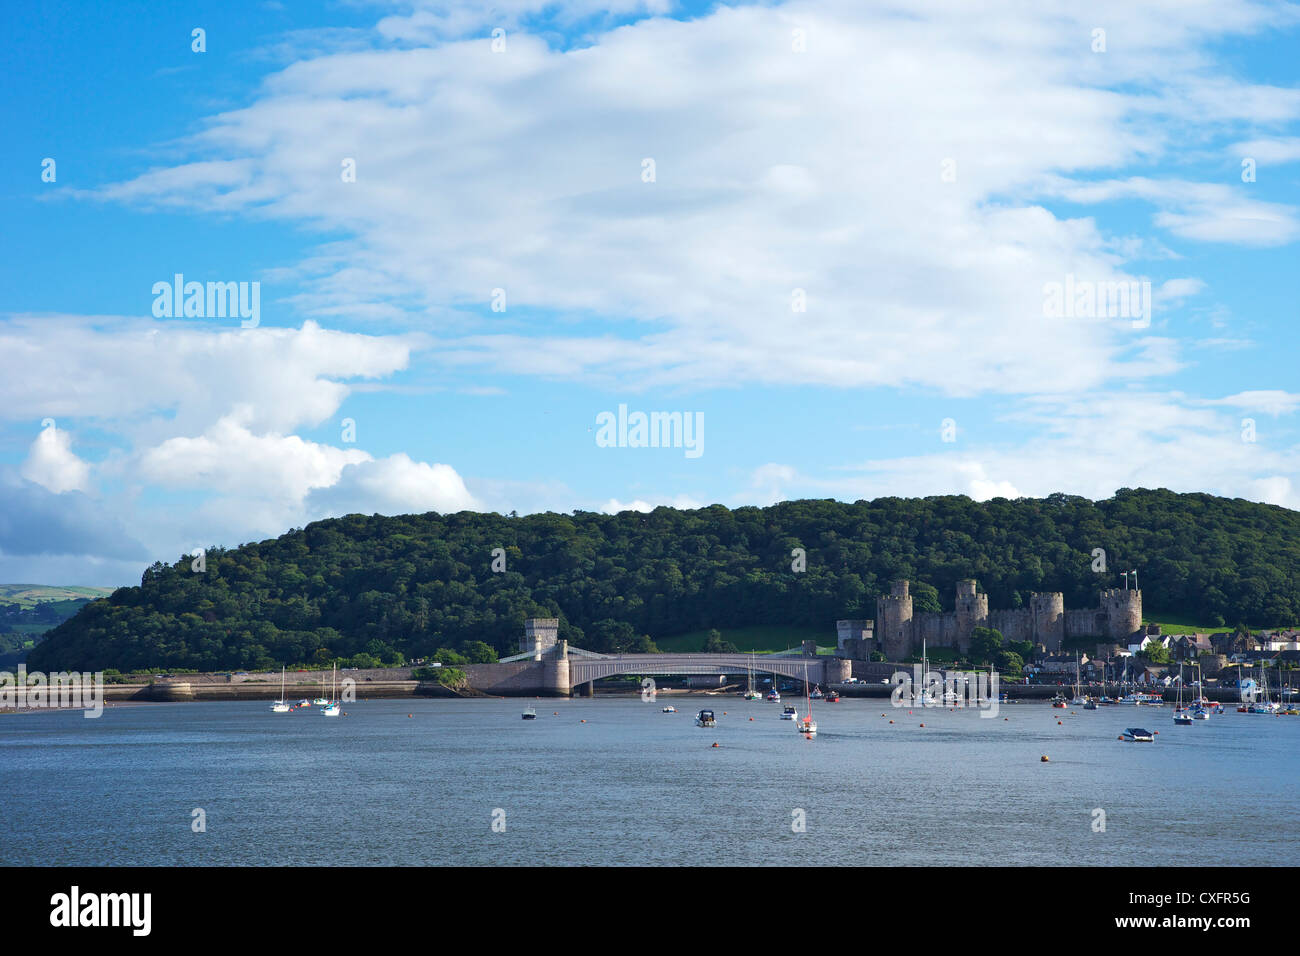 River Conwy estuary and medieval castle in summer, Gwynned, North Wales, UK, GB, British Isles, Europe Stock Photo